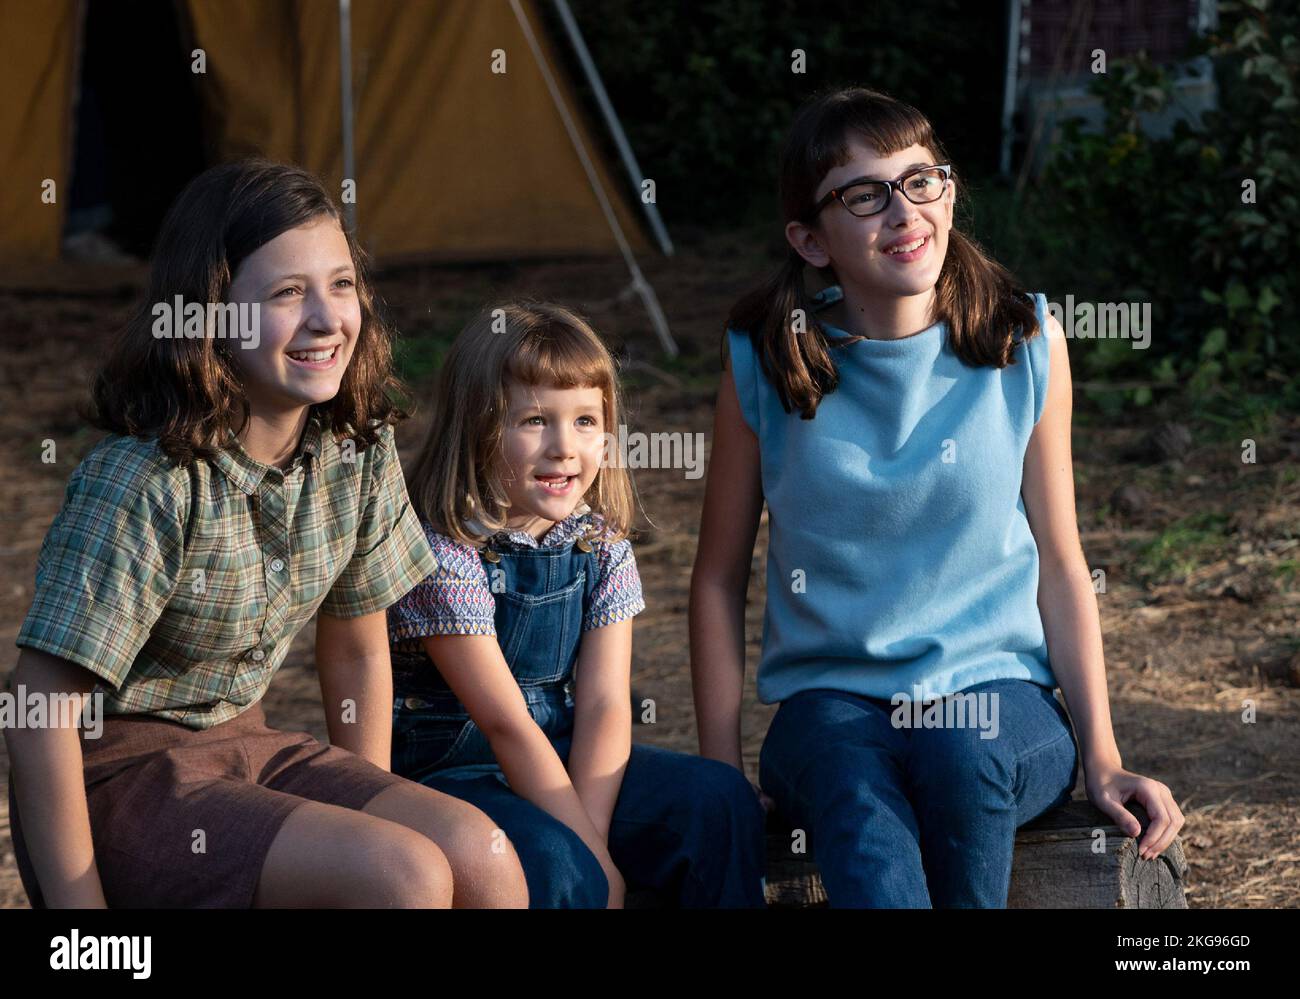 (from left) Natalie Fabelman (Keeley Karsten), Lisa Fabelman (Sophia Kopera) and Reggie Fabelman (Julia Butters) in 'The Fabelmans' (2022), co-written, produced and directed by Steven Spielberg. Photo credit: Merie Weismiller Wallace/Universal Pictures Stock Photo